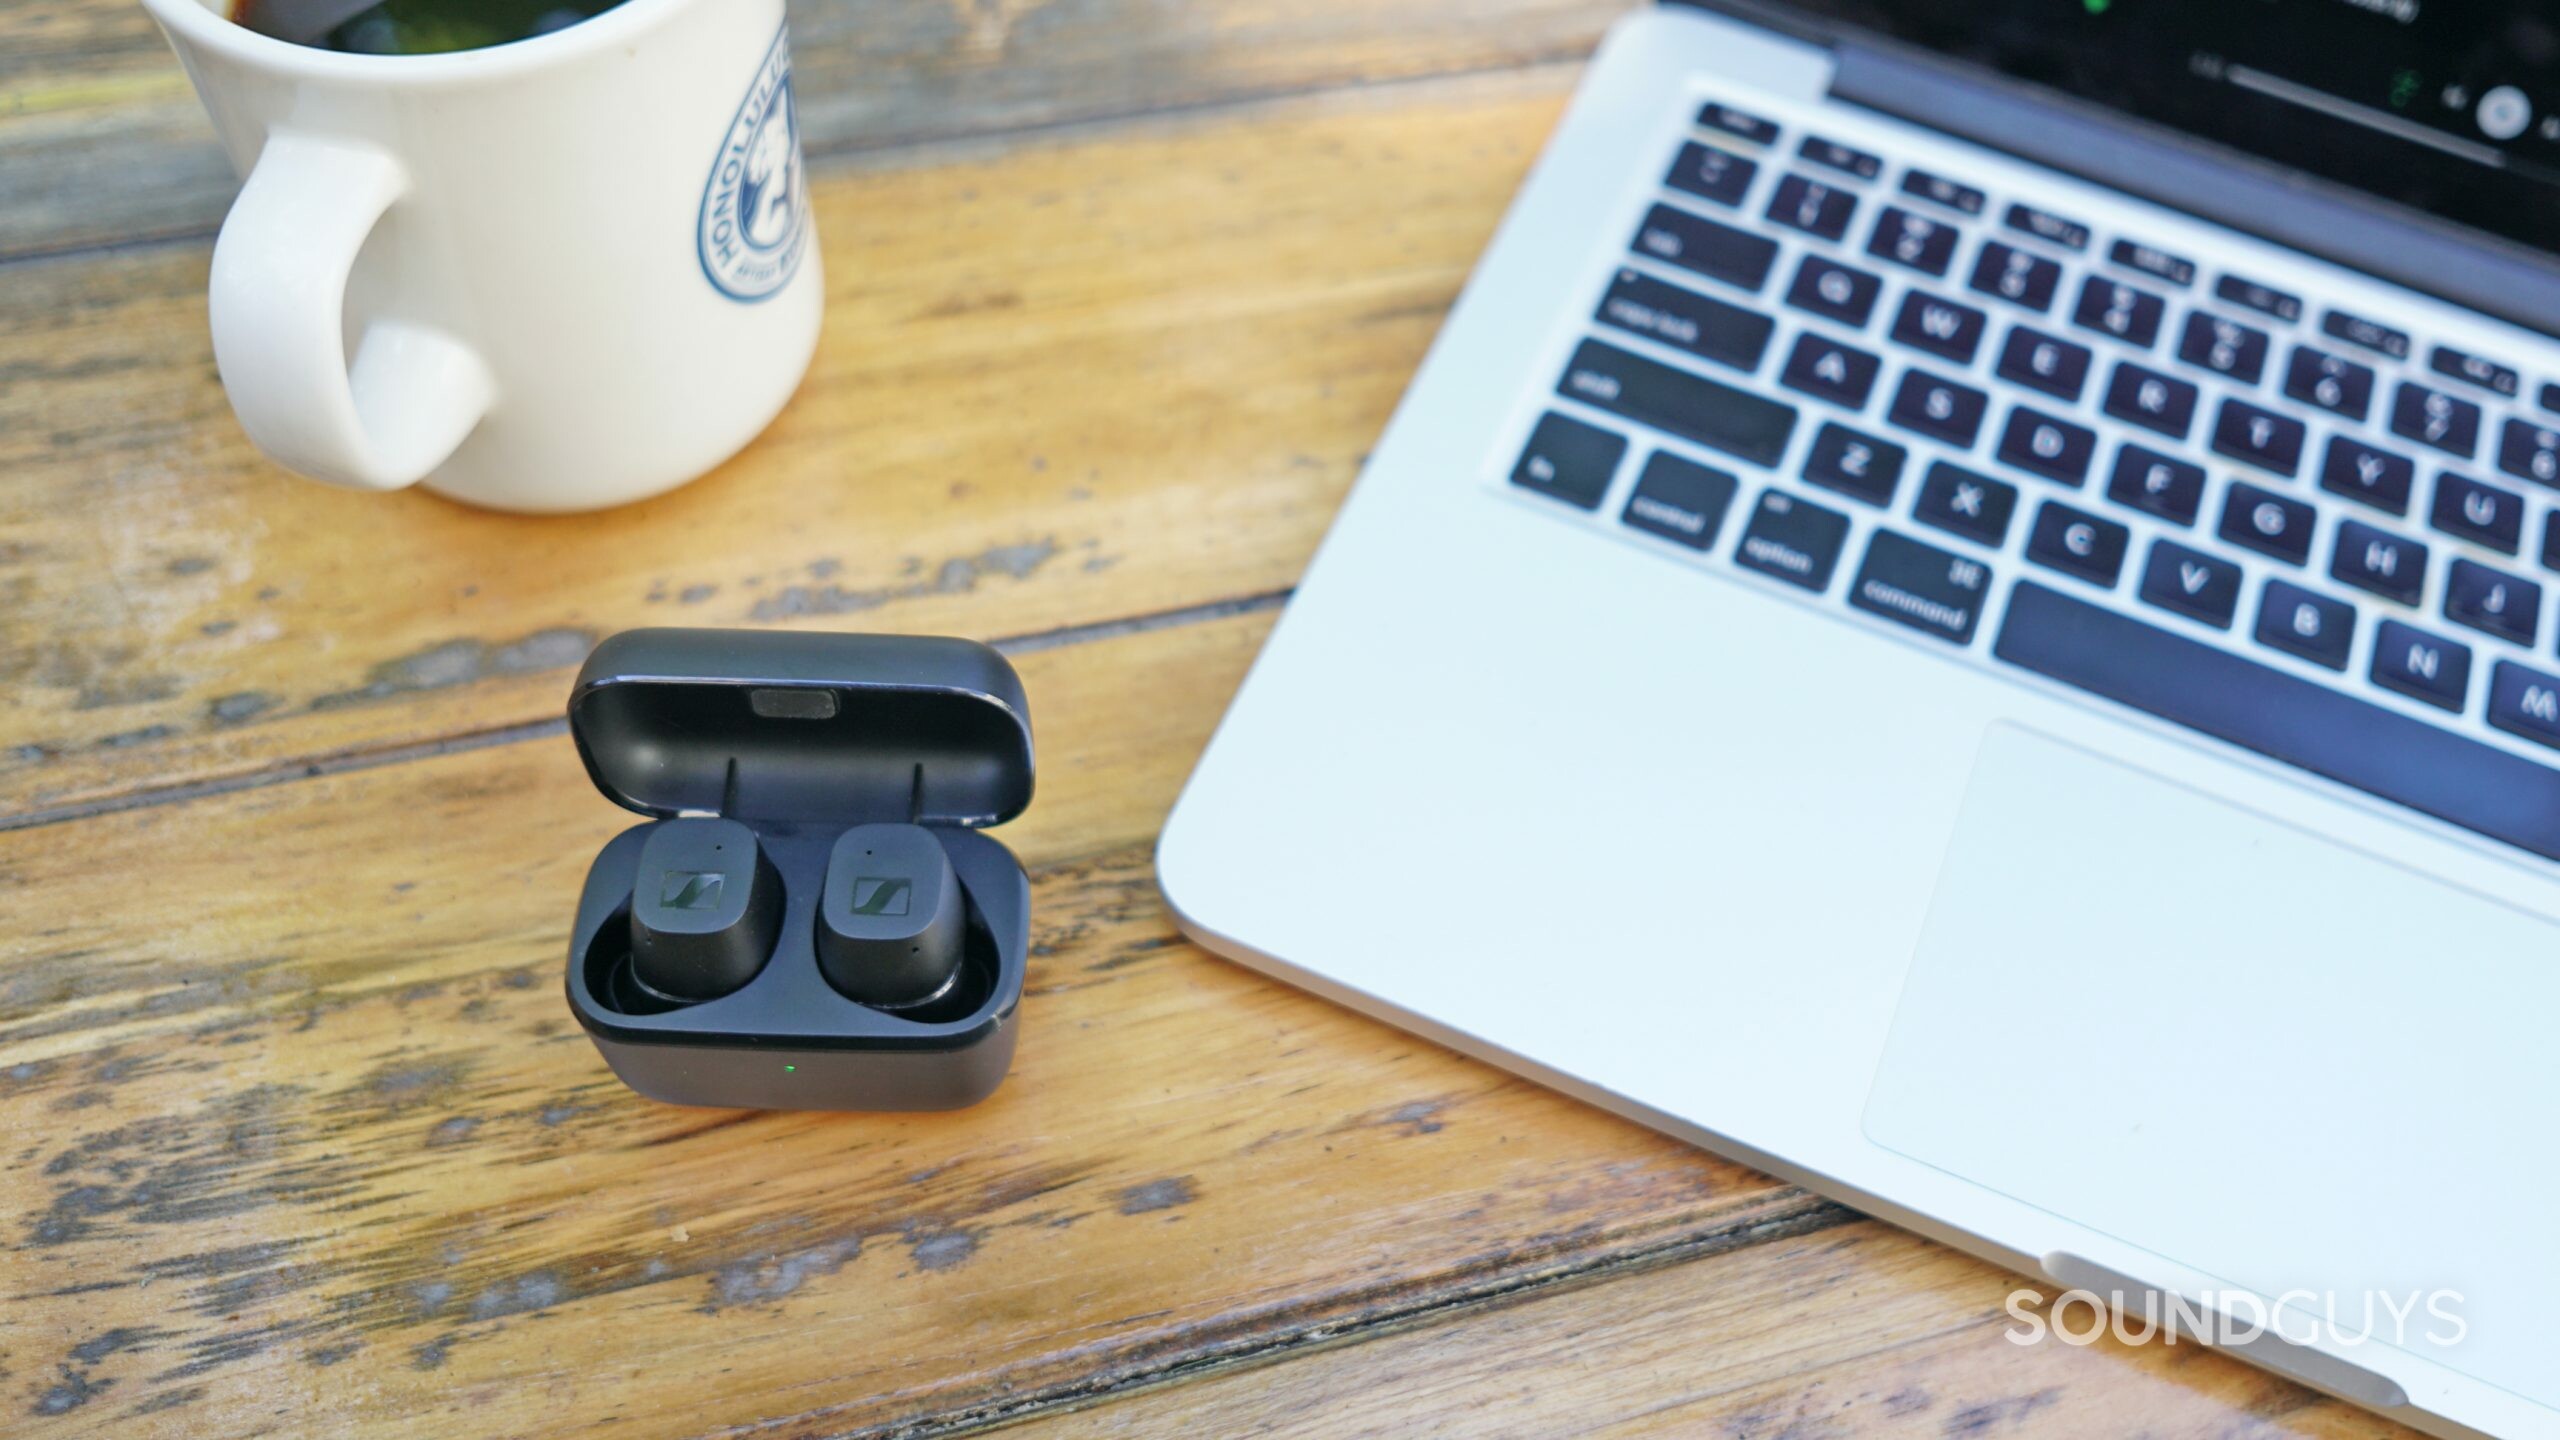 The Sennheiser CX True Wireless sits in its charging case next to an Apple MacBook Pro and a cup of coffee on a wooden table.